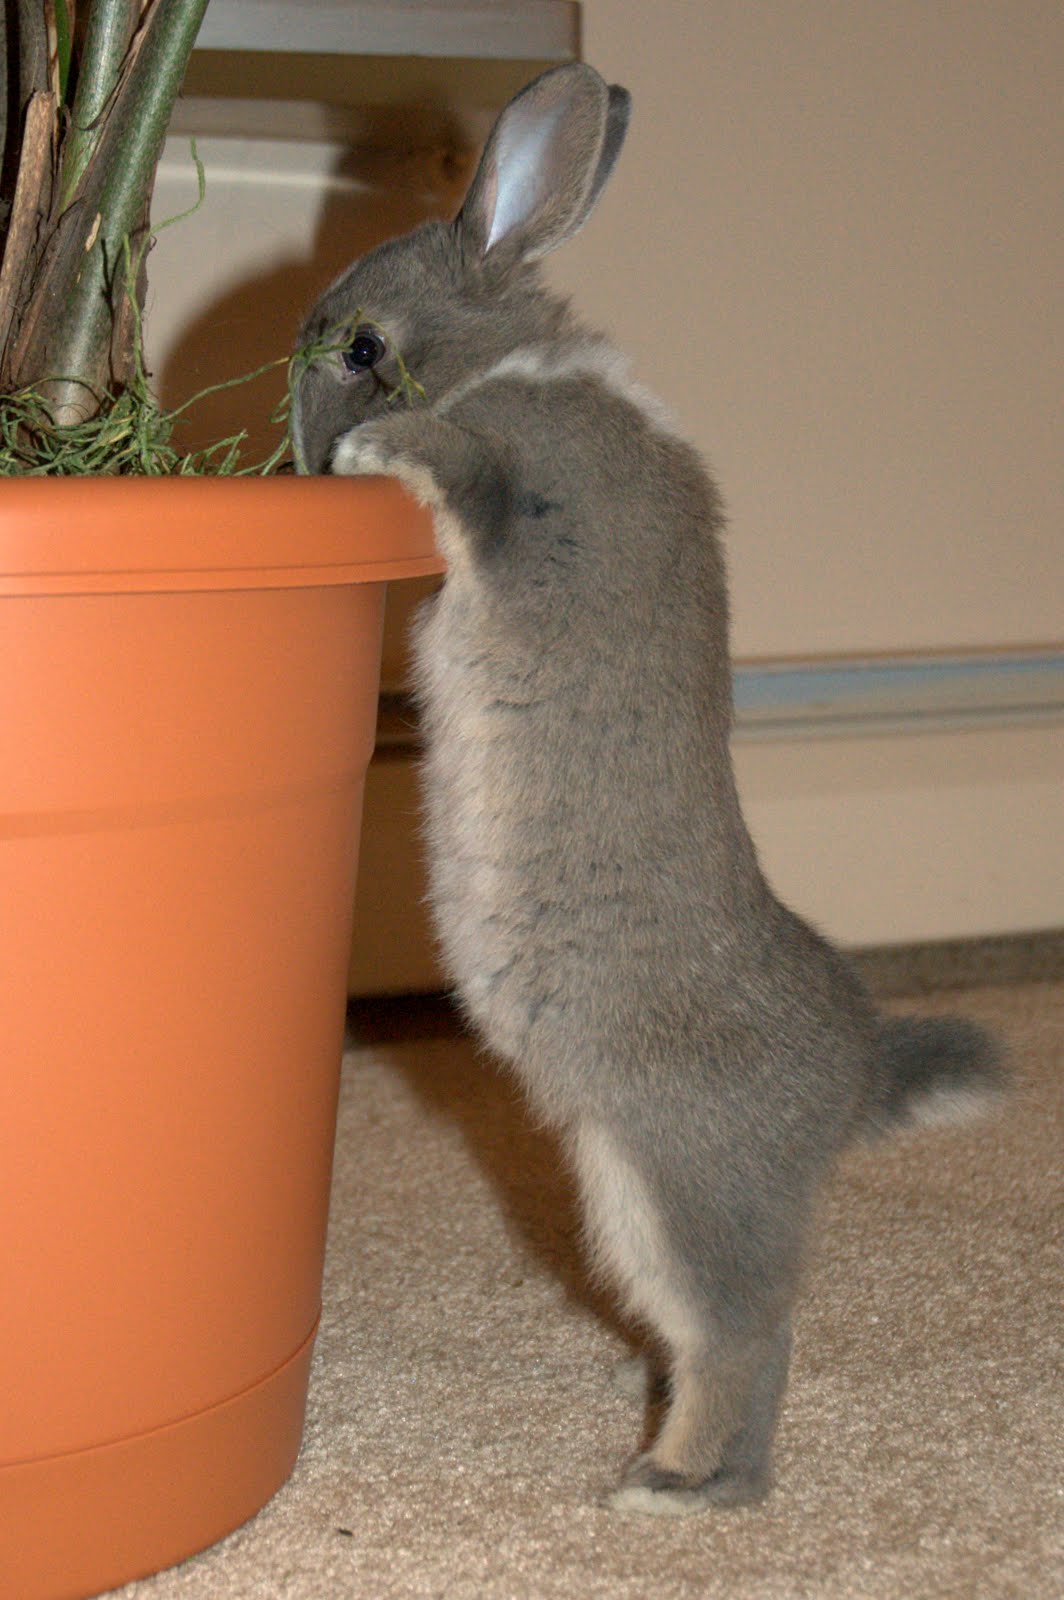 Bunny Stretches Up to See What's Available in the Planter for Nomming